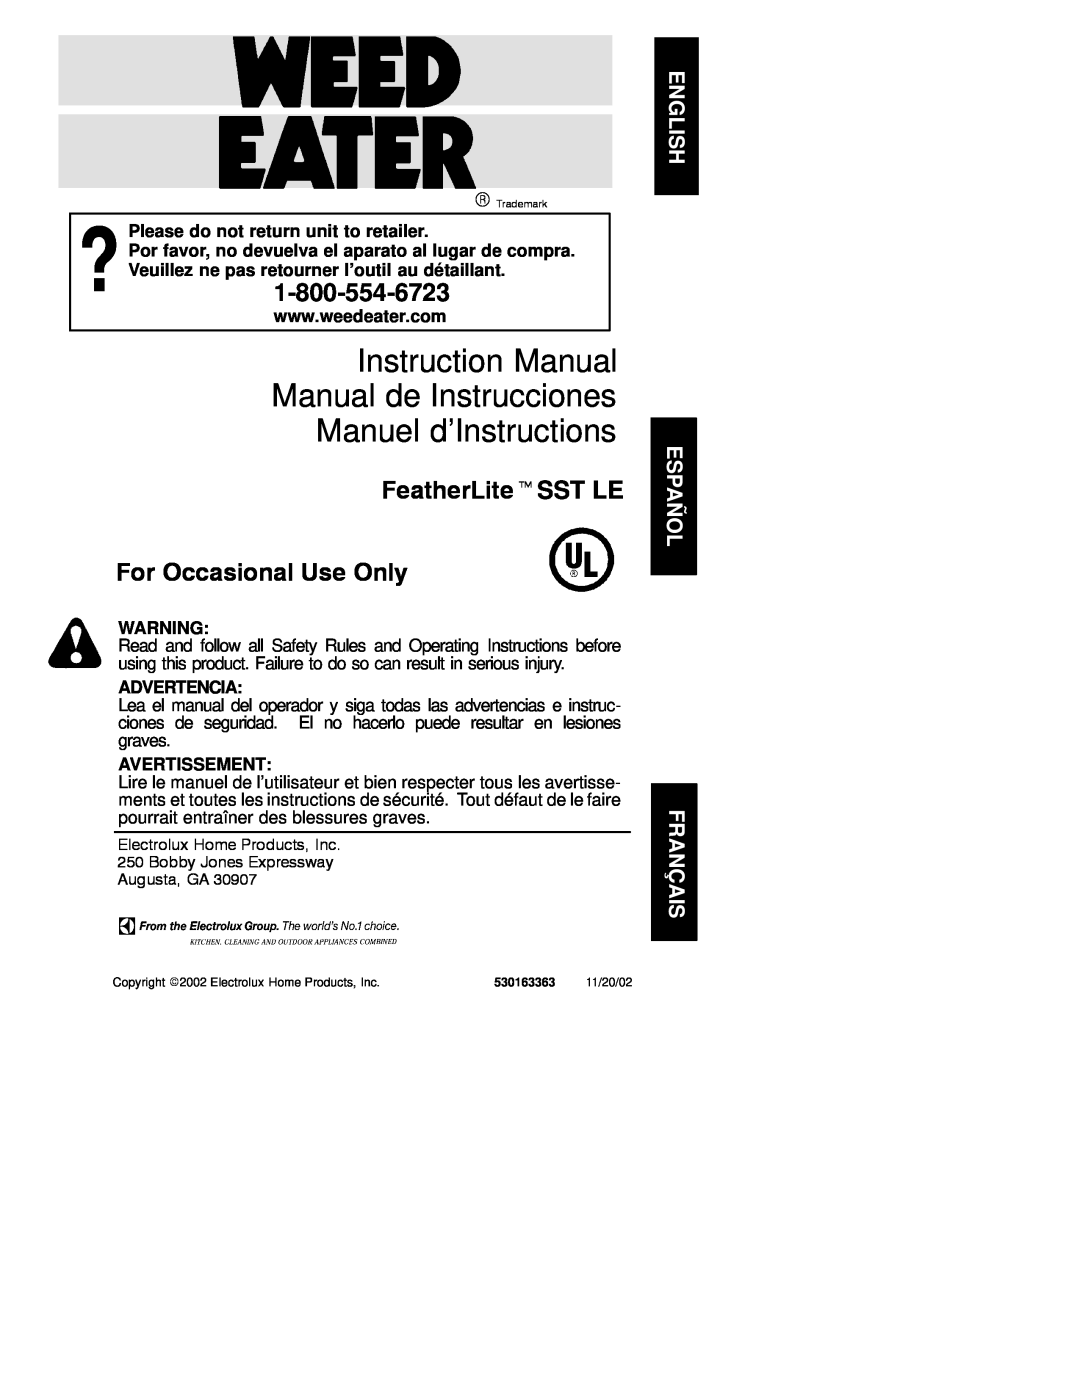 Electrolux WEEDEATER instruction manual Please do not return unit to retailer, Advertencia, Avertissement 